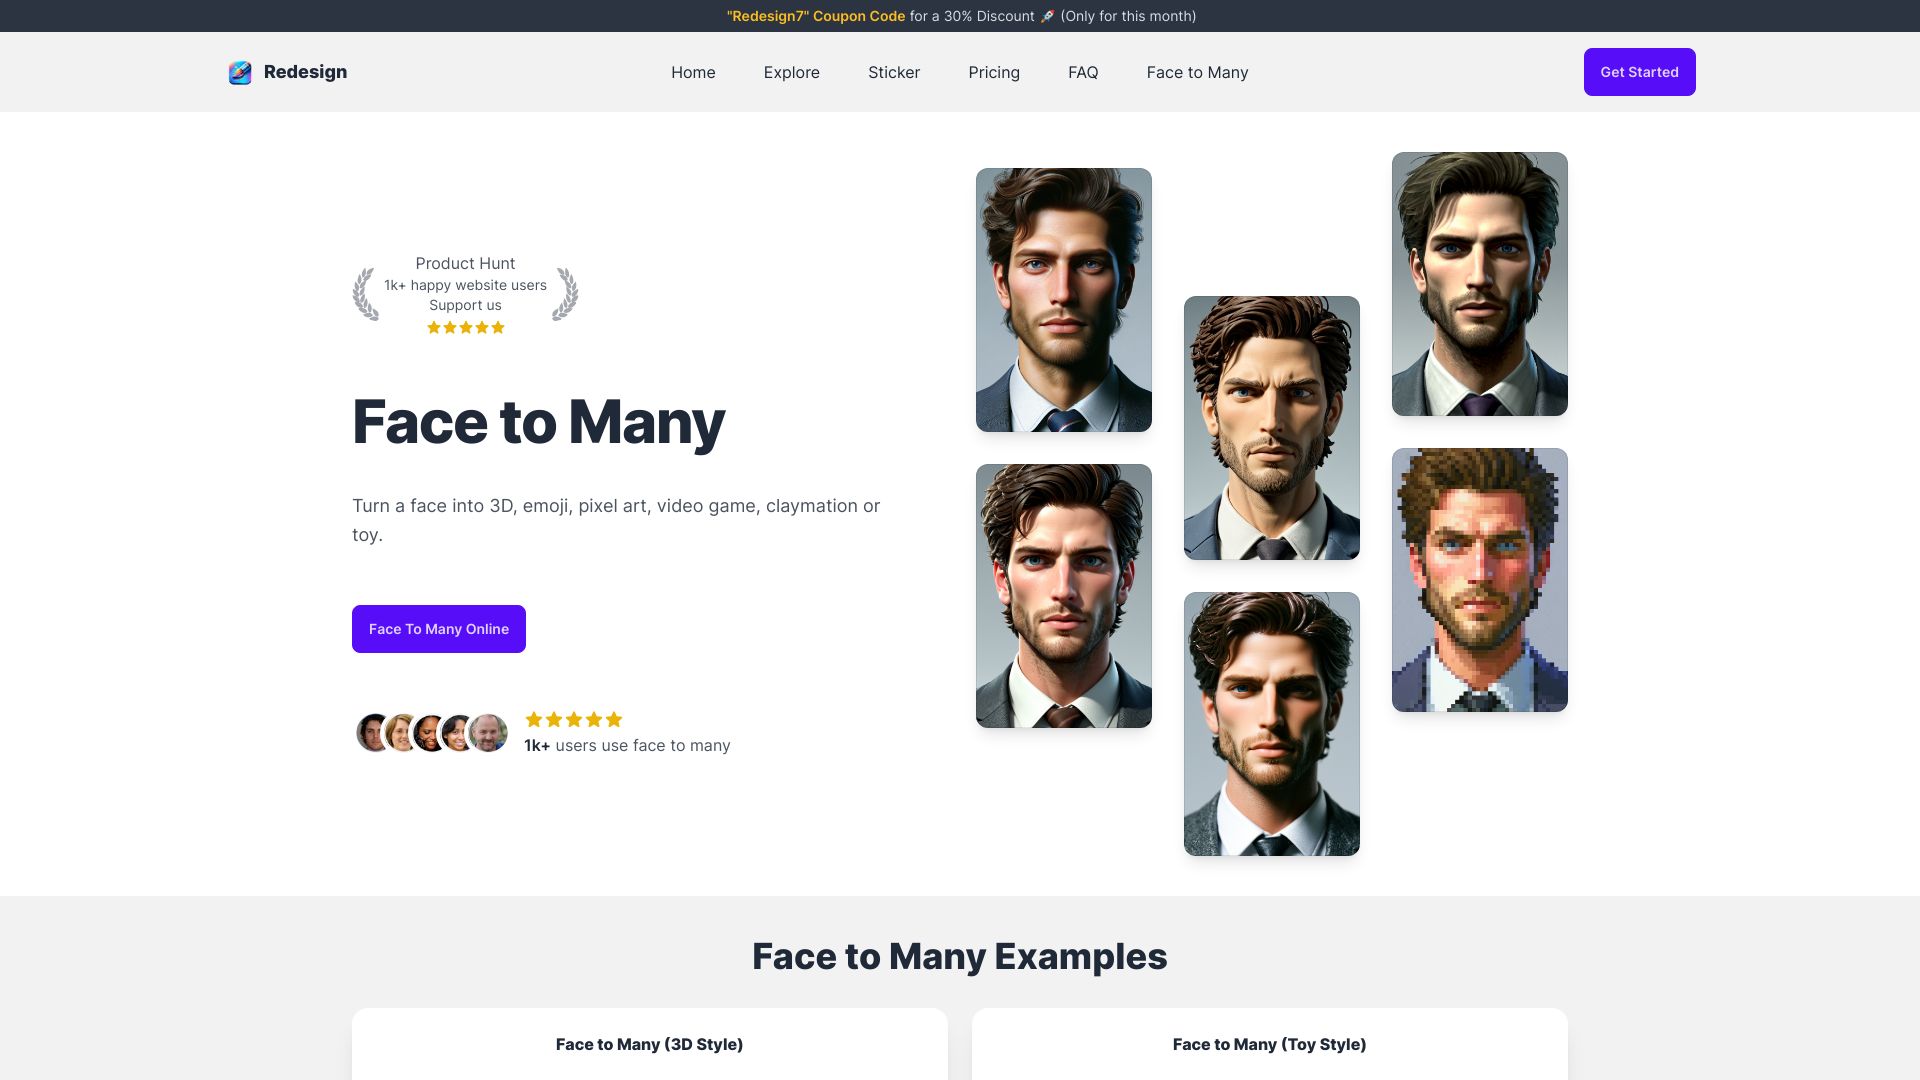 Face to Many by Redesign